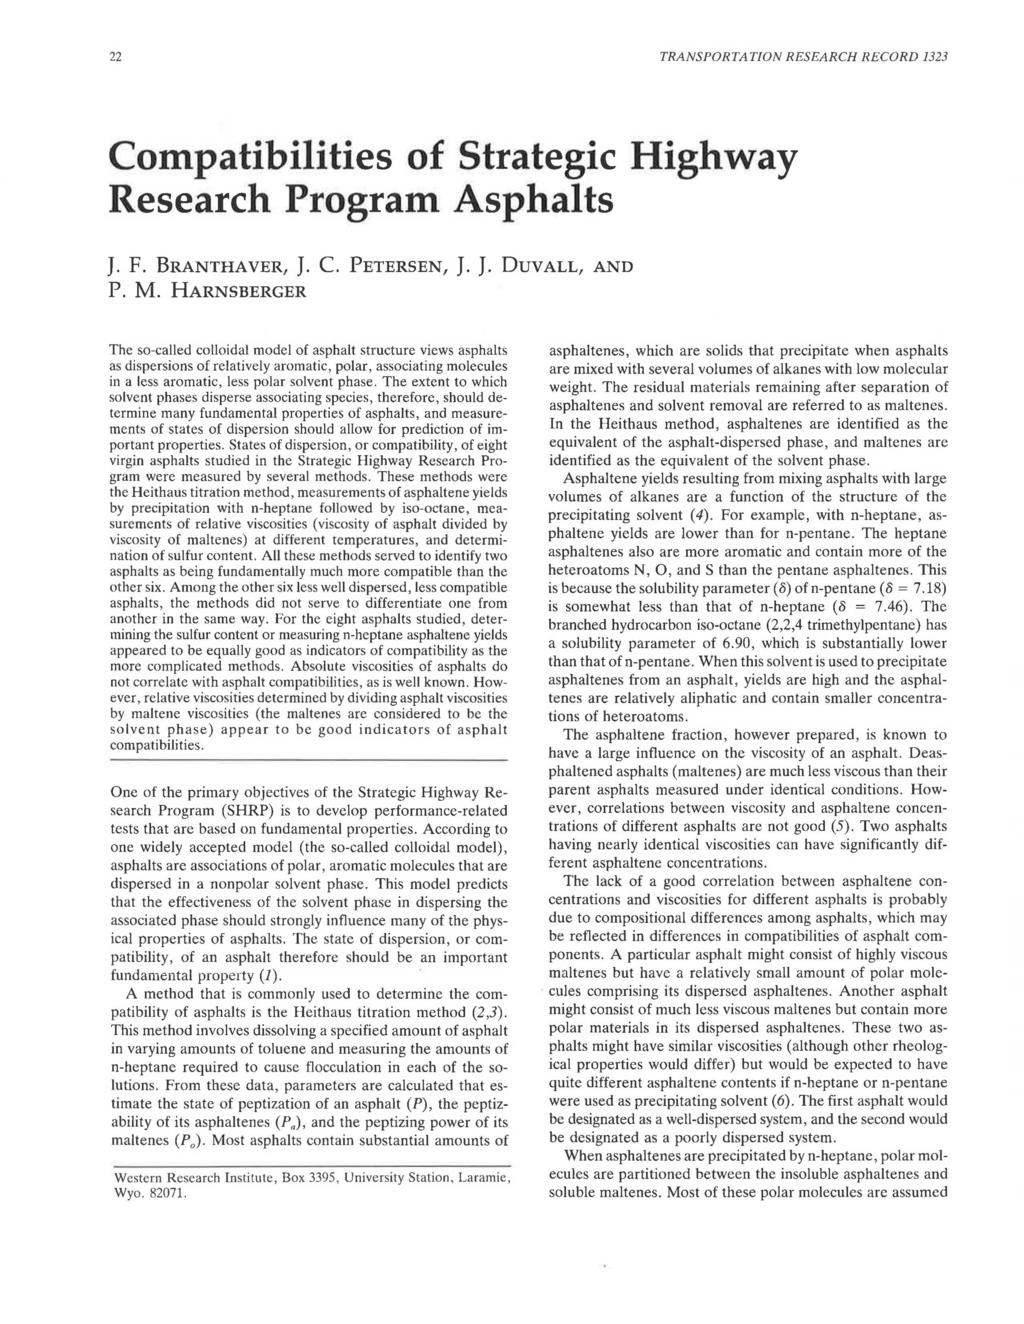 TRANSPORTATION RESEARCH RECORD 1 Compatibilities of Strategic Highway Research Program Asphalts J. F. BRANTHAVER, J. c. PETERSEN, J. J. DUVALL, AND P. M.